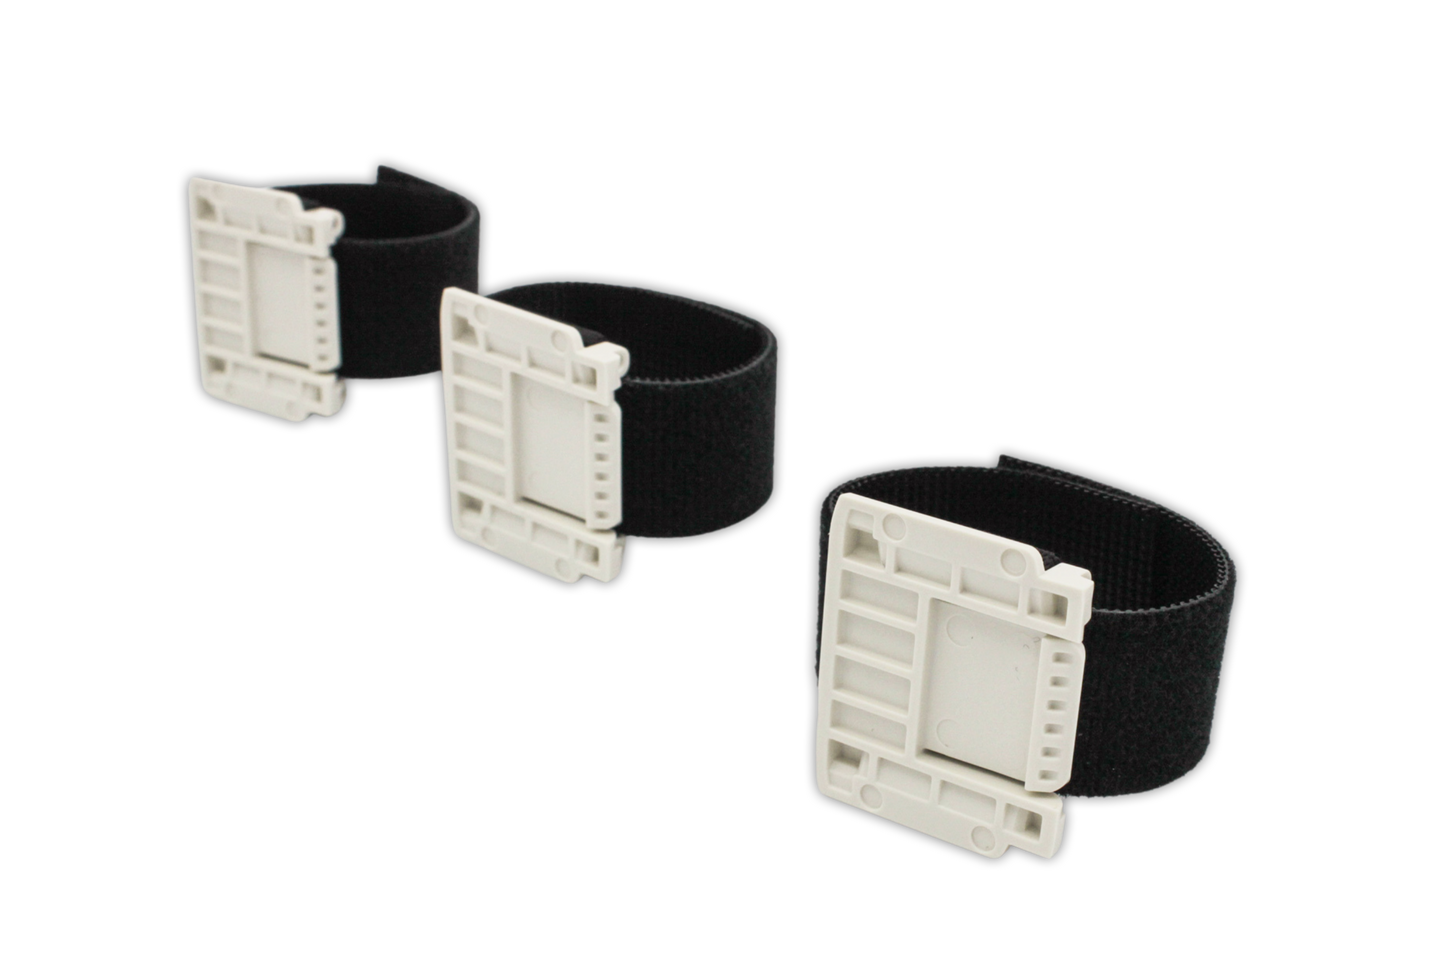 3-Pack of Velcro Attachments